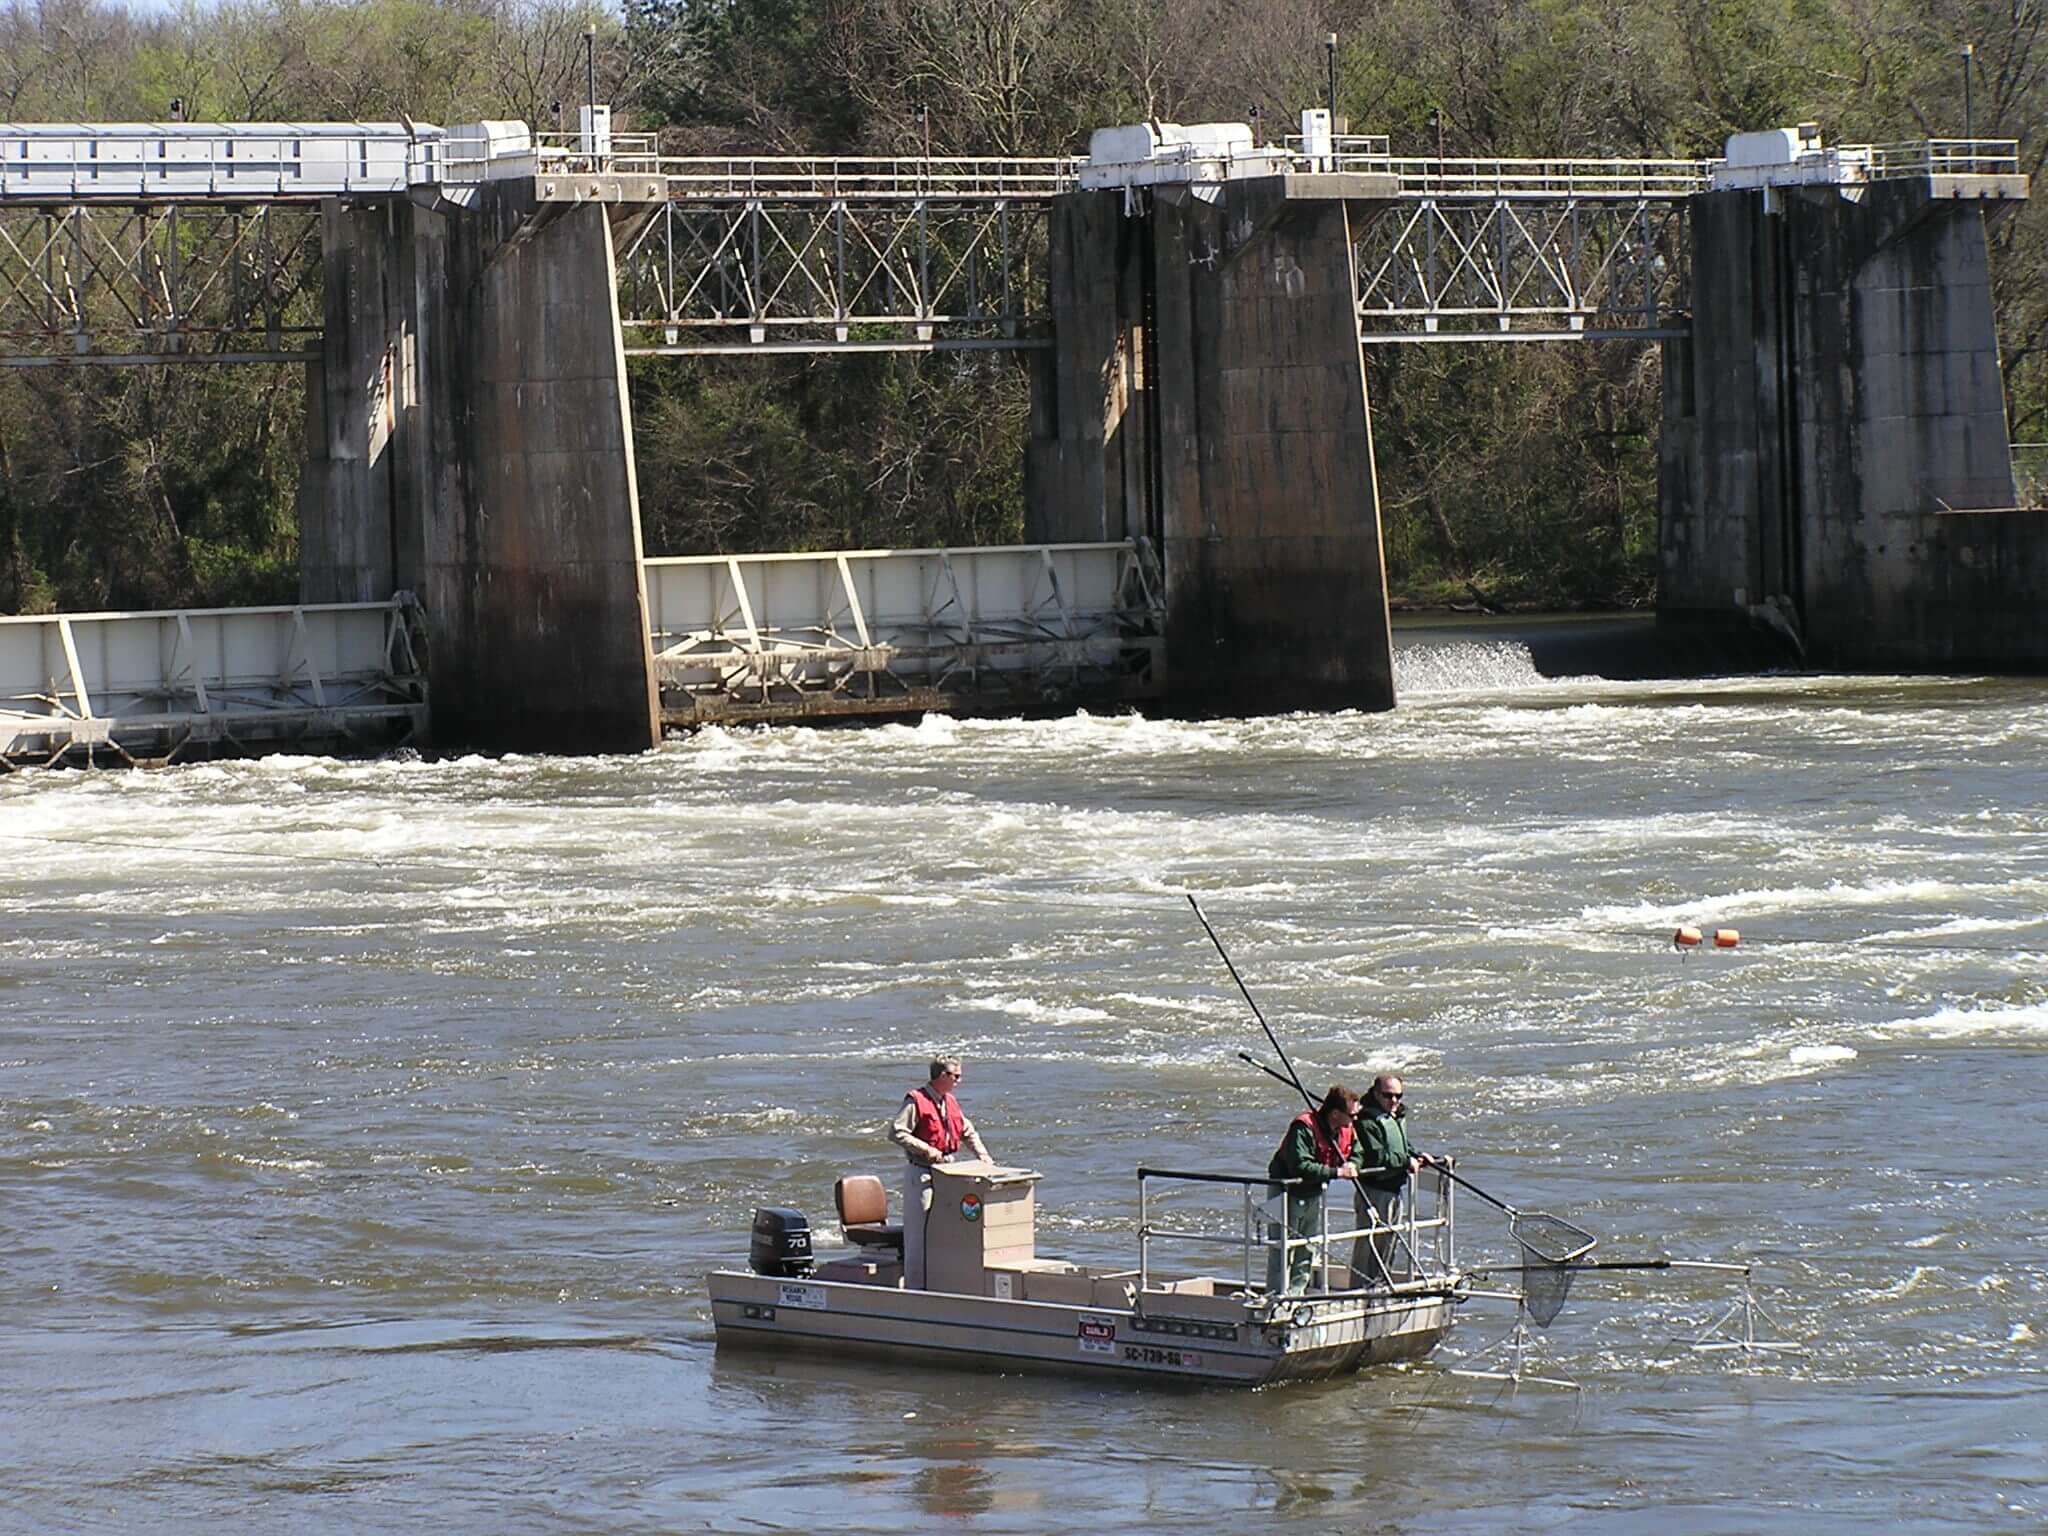 Staff of the South Carolina Department of Natural Resources monitor fish populations in the Savannah River.